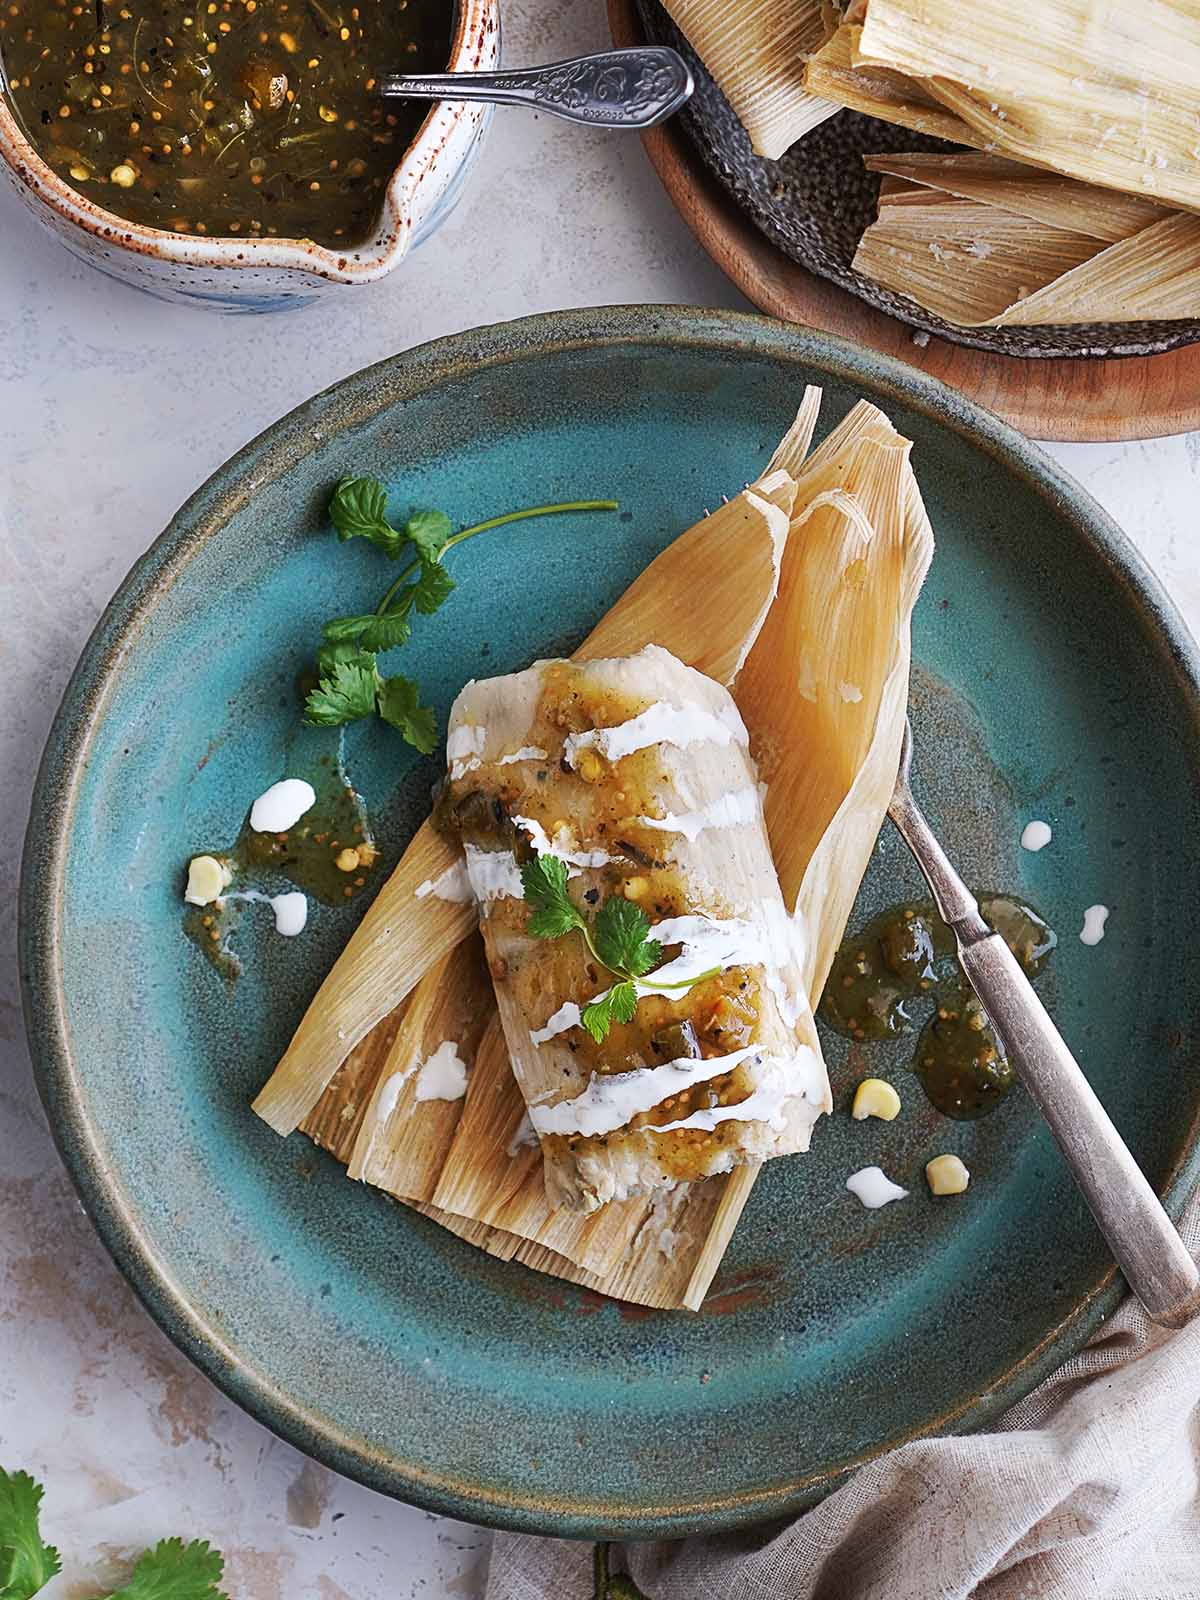 A green chile corn tamal placed on husks on a green plate.